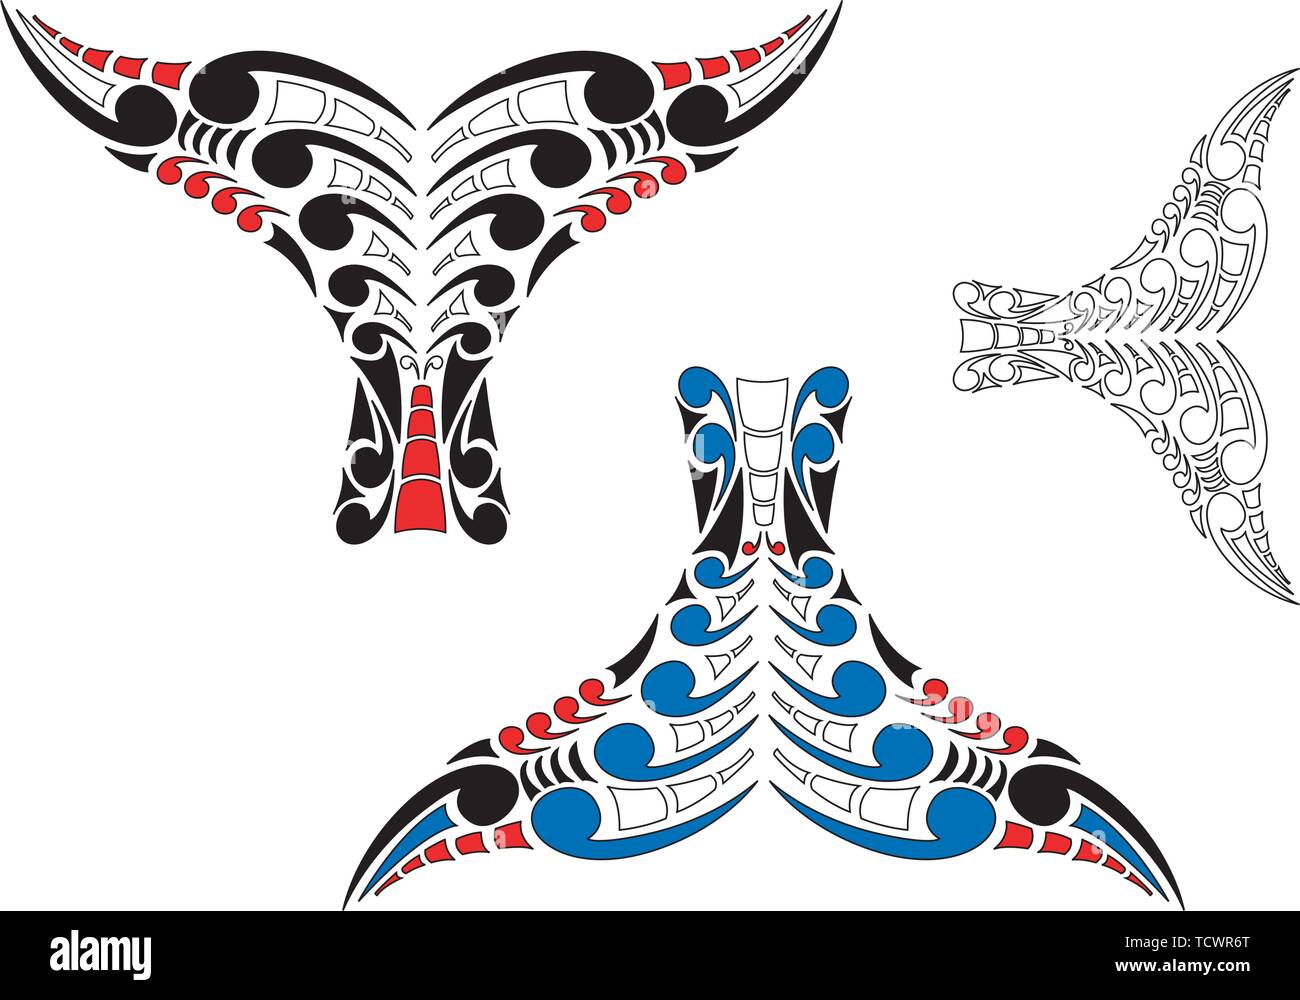 Stylised Maori Koru Whale Tail Design with color variations Stock Vector